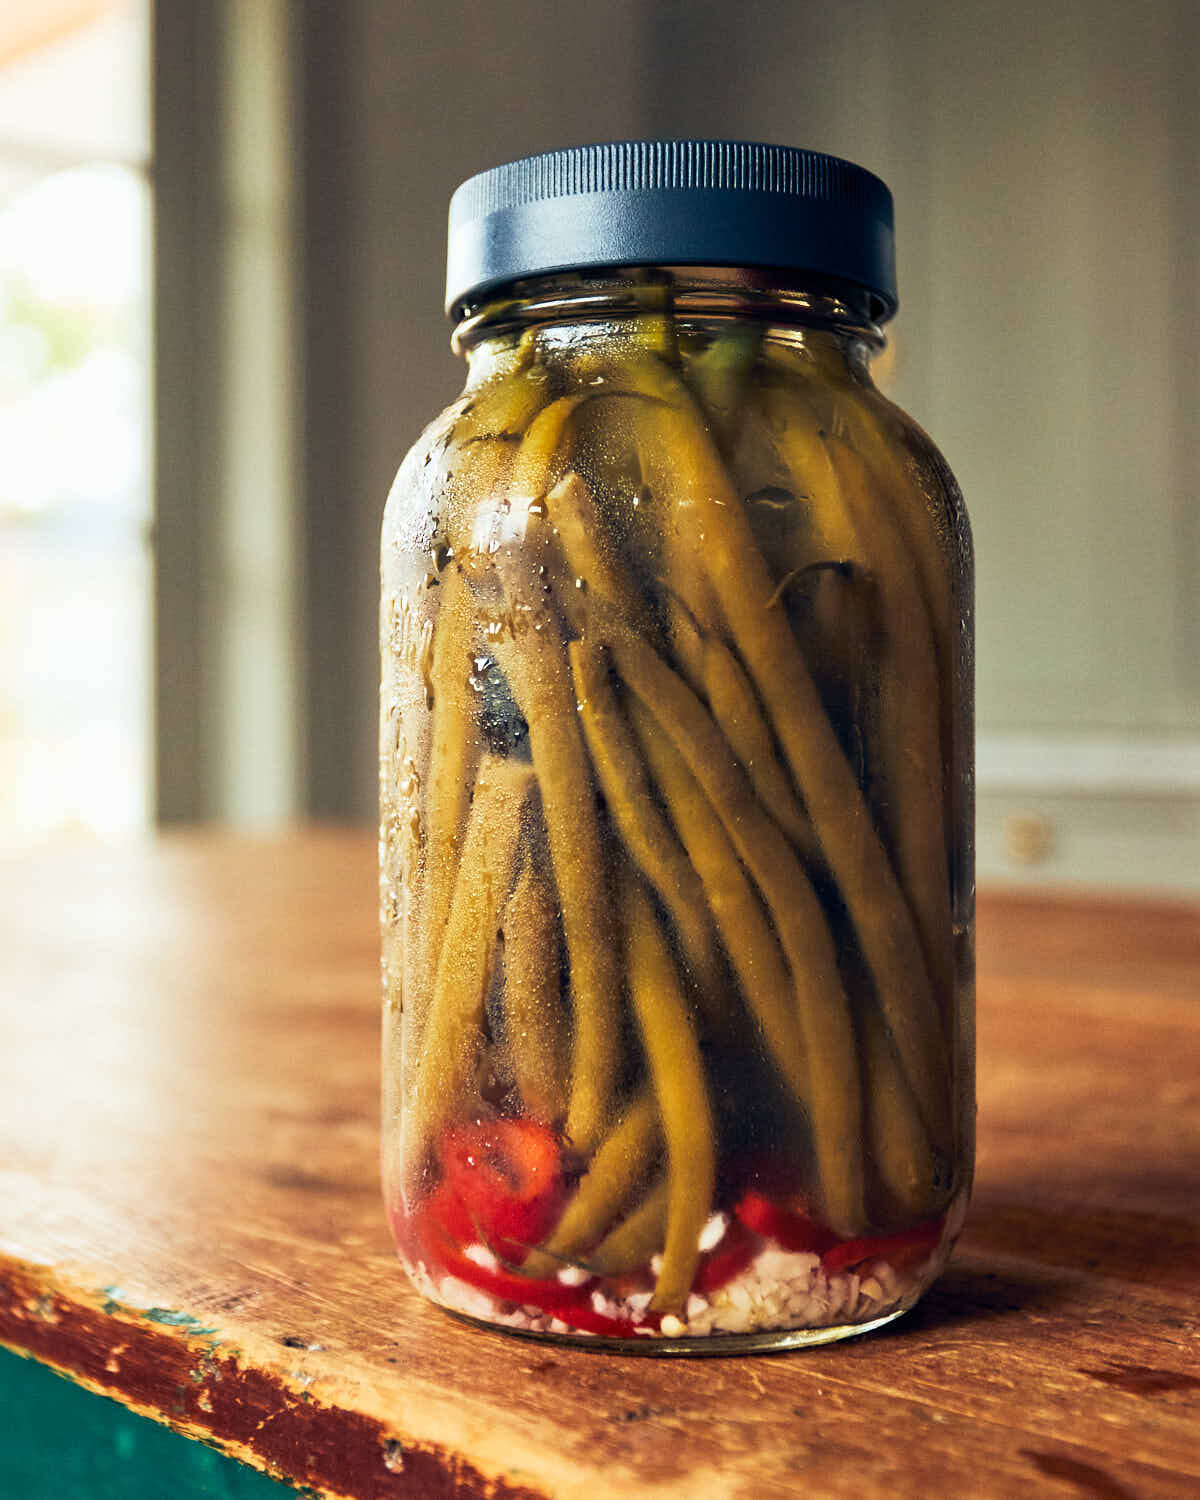 Jar of quick pickled green beans sitting on a wooden table in a kitchen